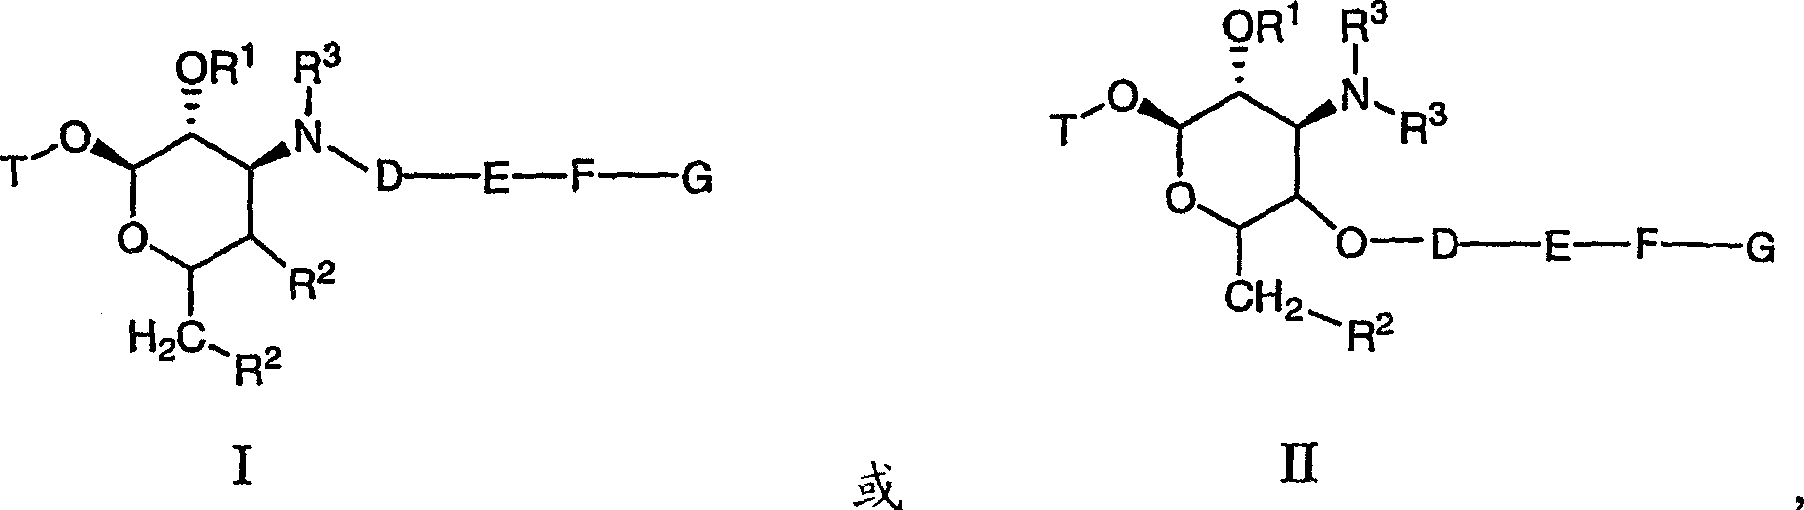 Macrocyclic compounds and methods of making and using the same